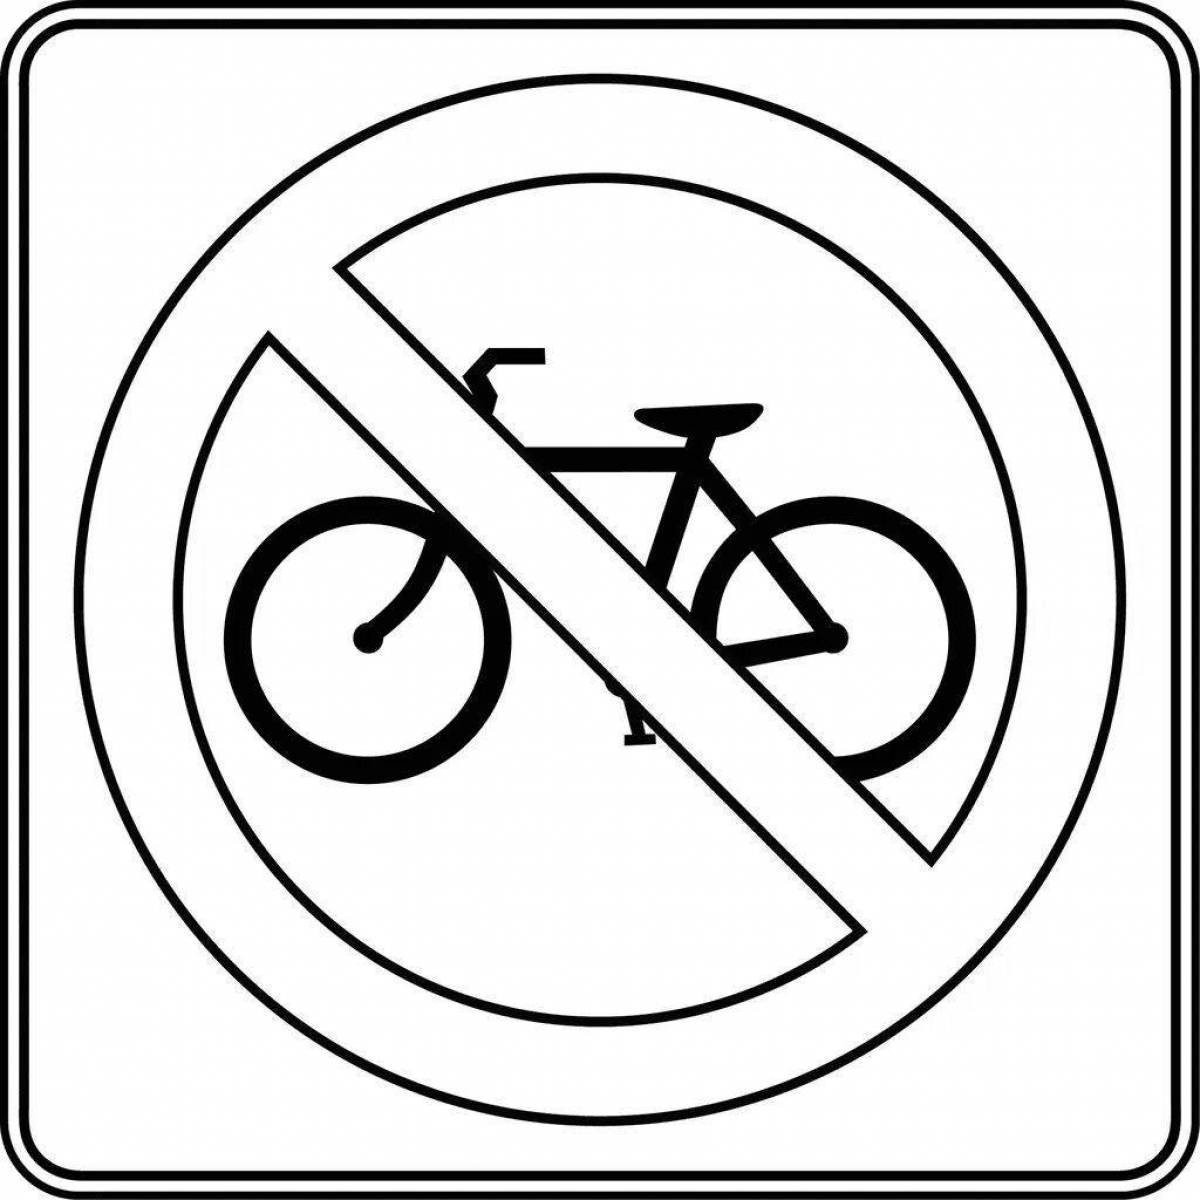 Coloring book forbidding traffic sign